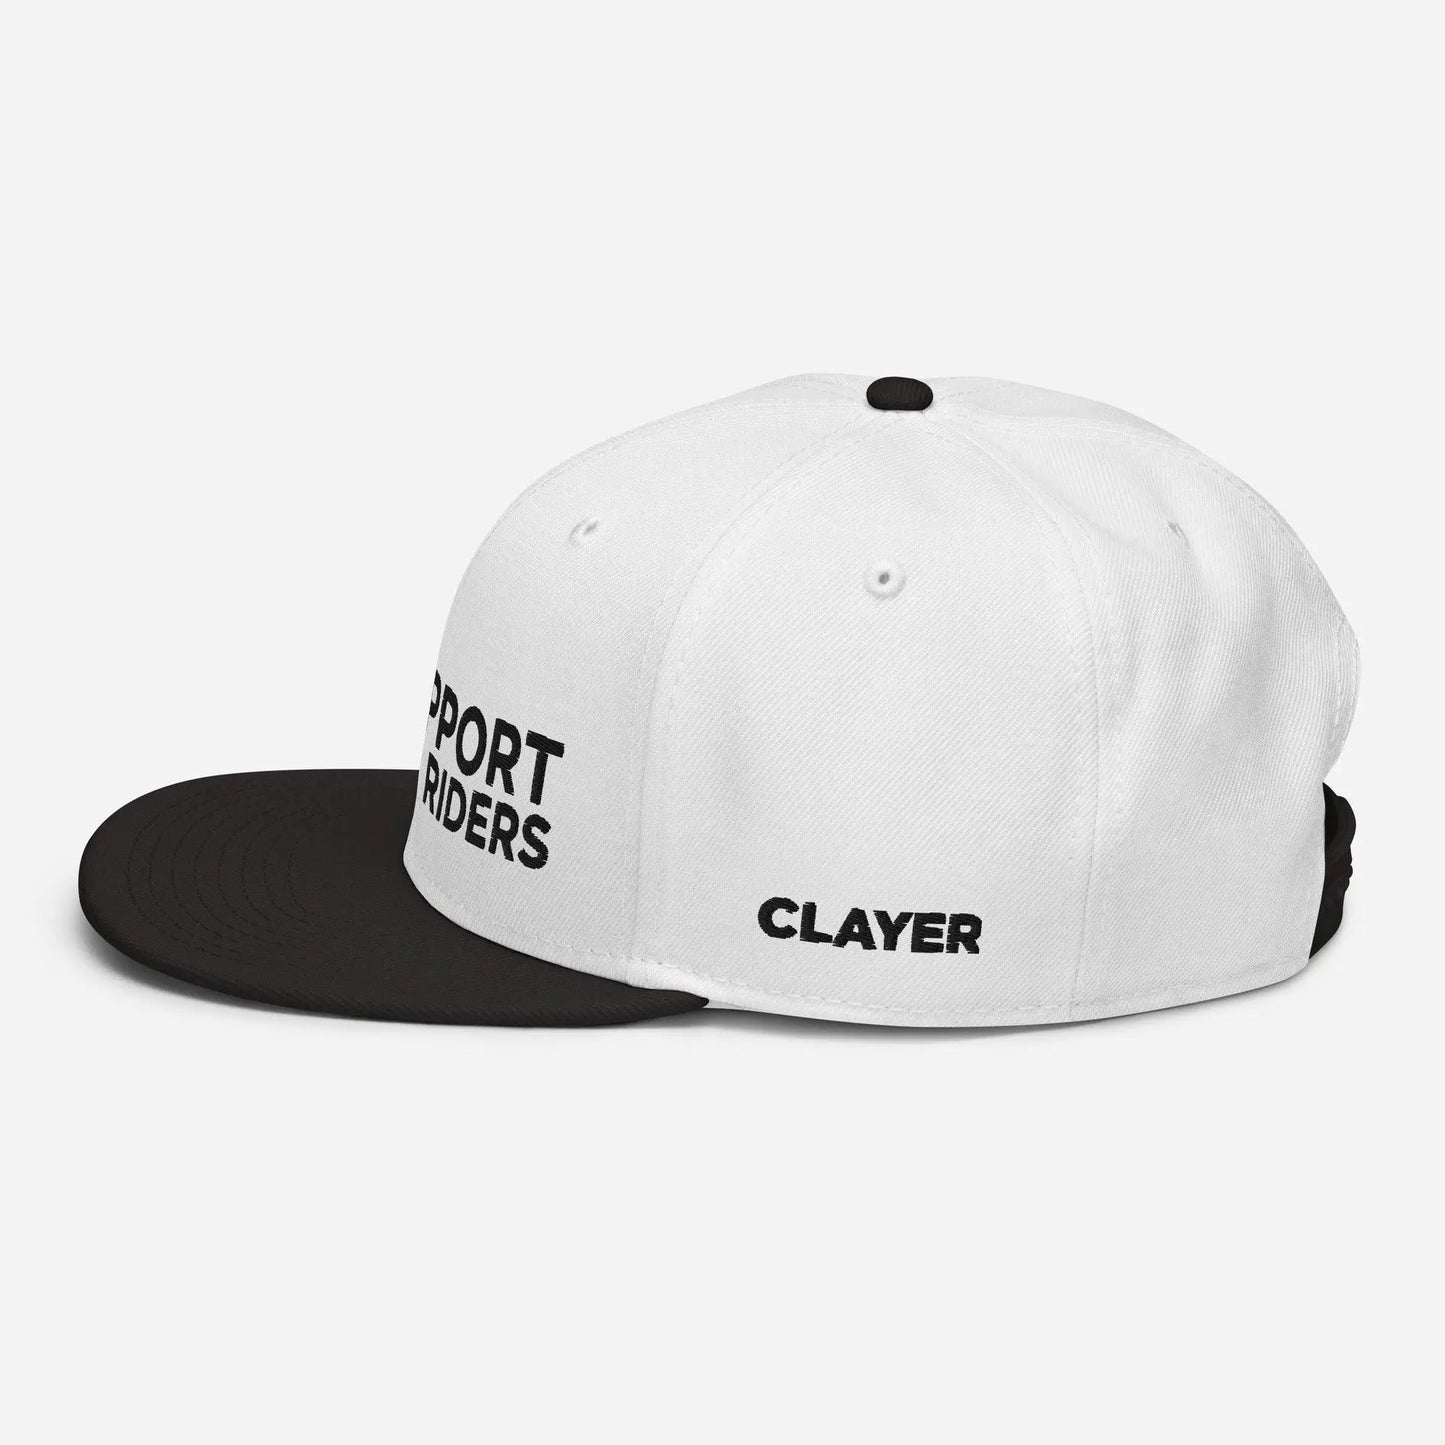 Clayer - Support Riders - Cappello Snapback - CLAYER